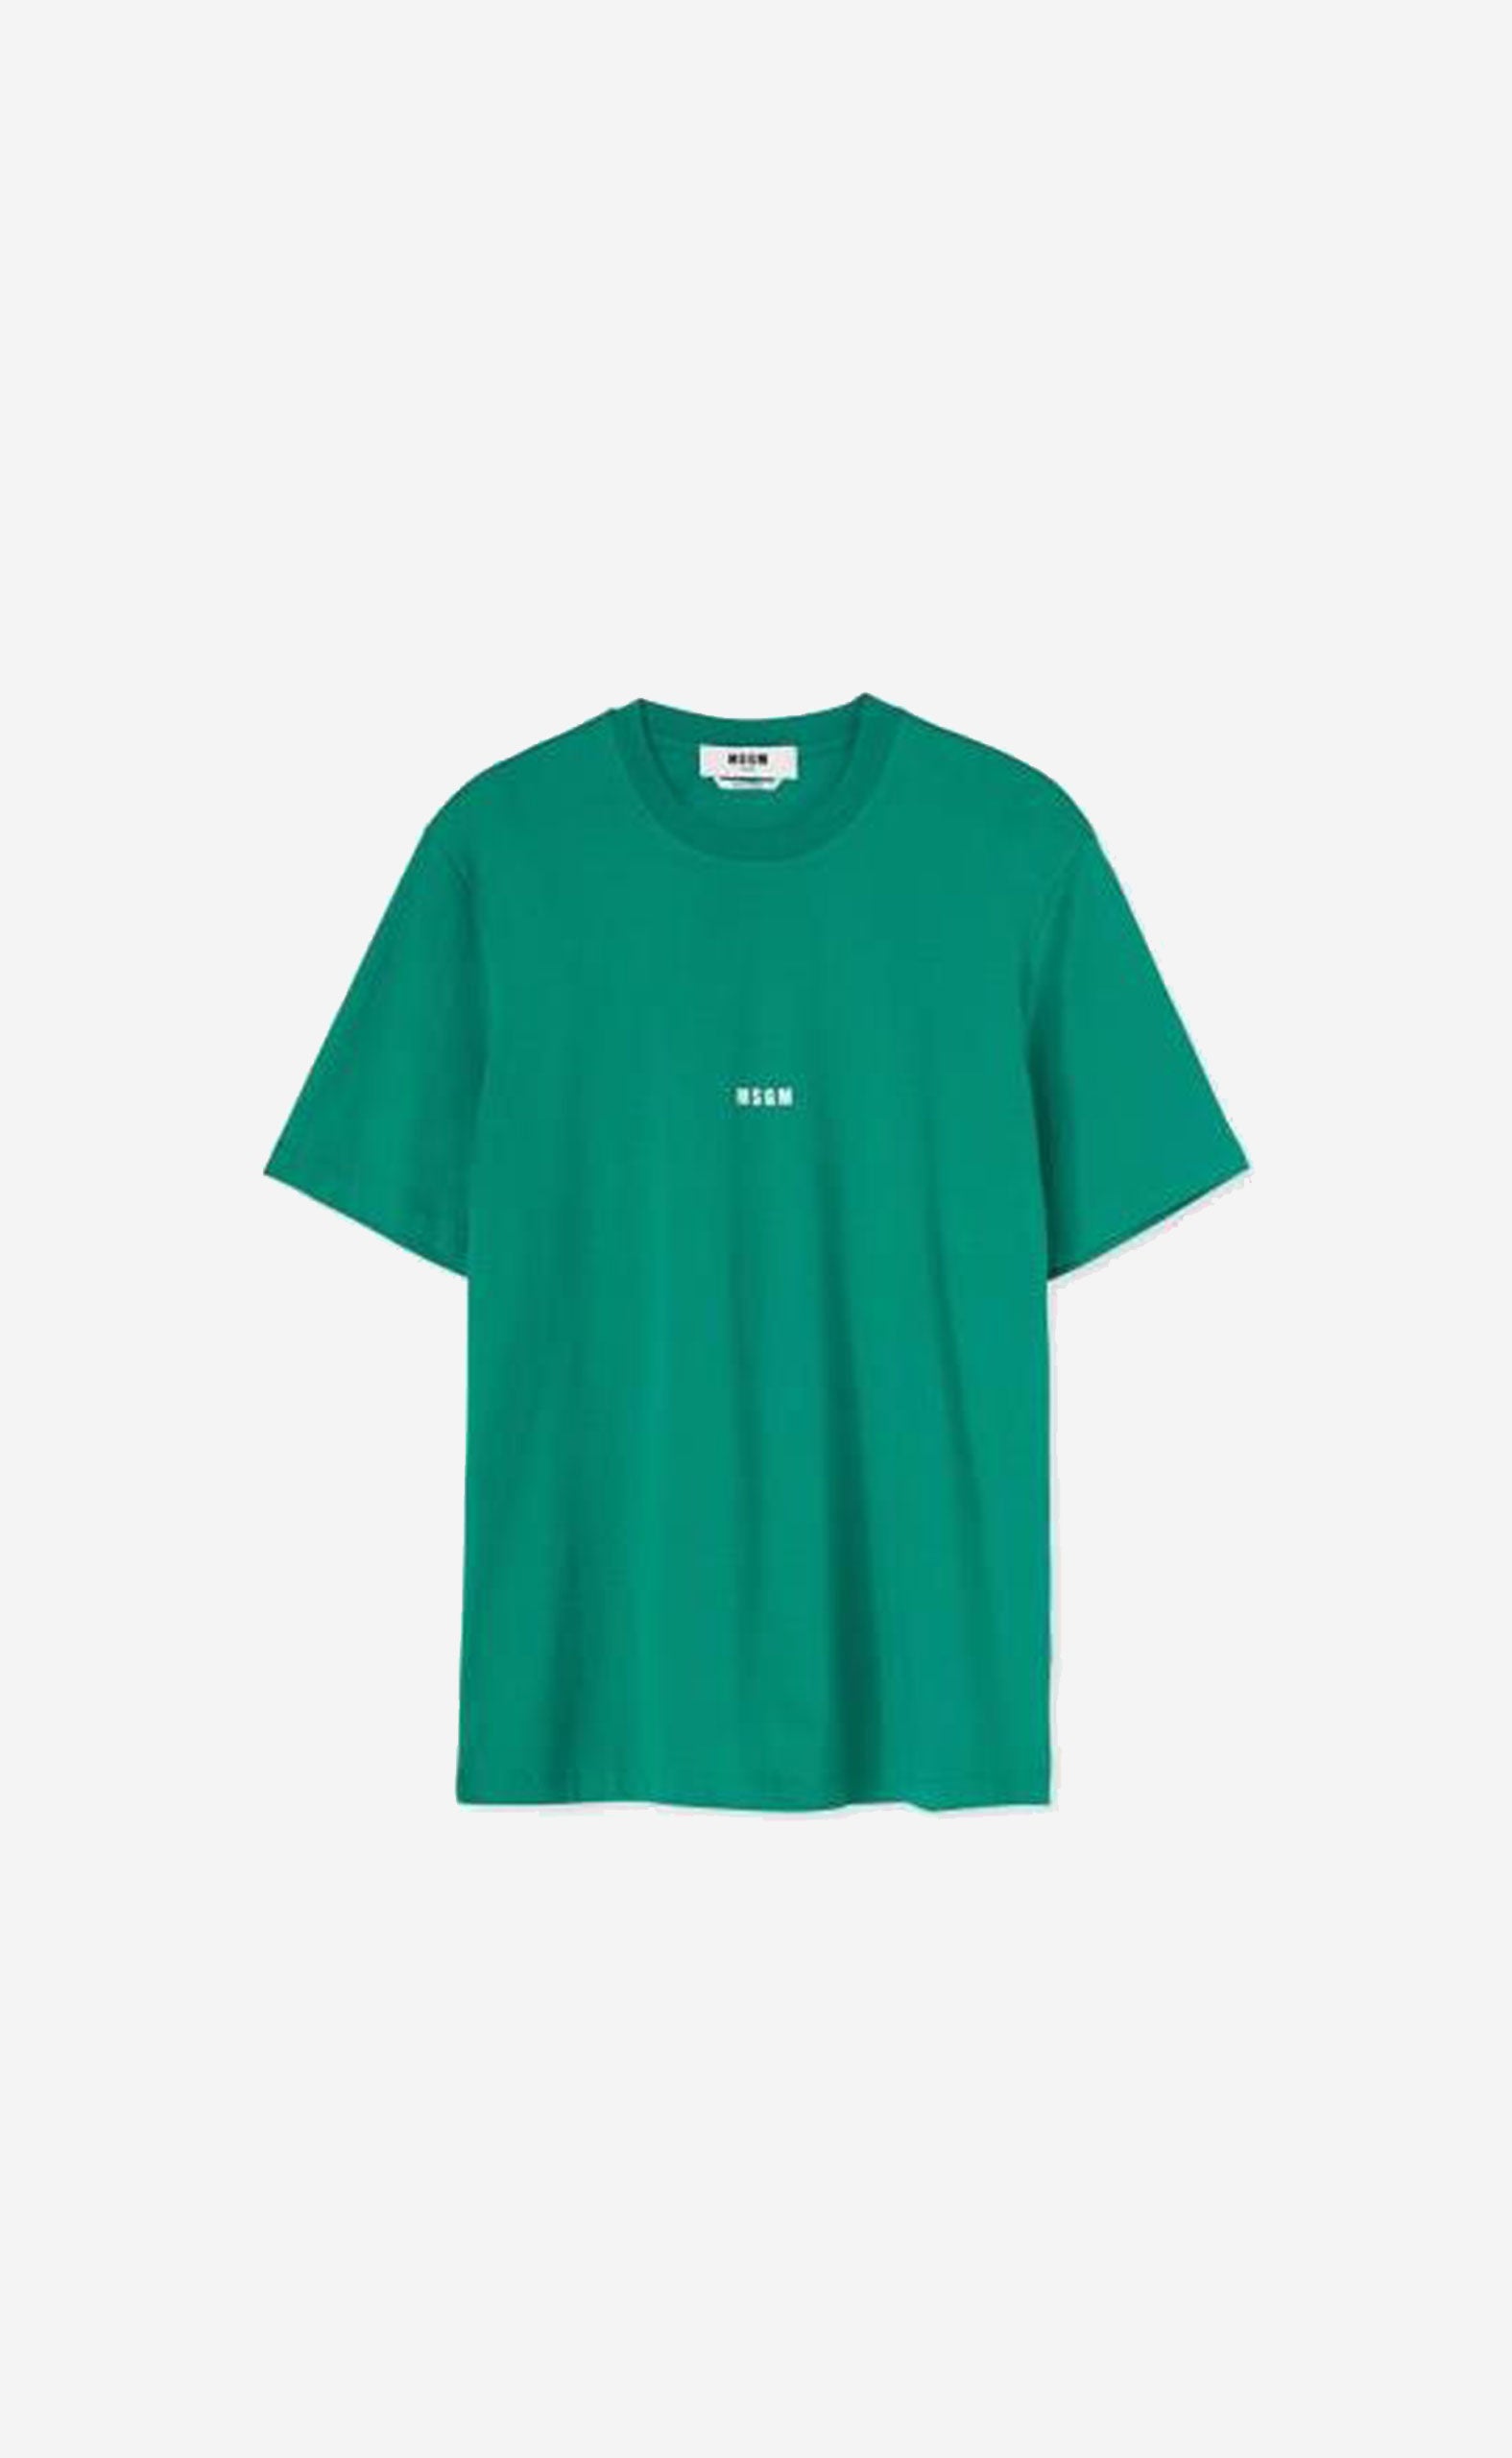 PEPPER GREEN COTTON CREW NECK T-SHIRT WITH SMALL MSGM LOGO